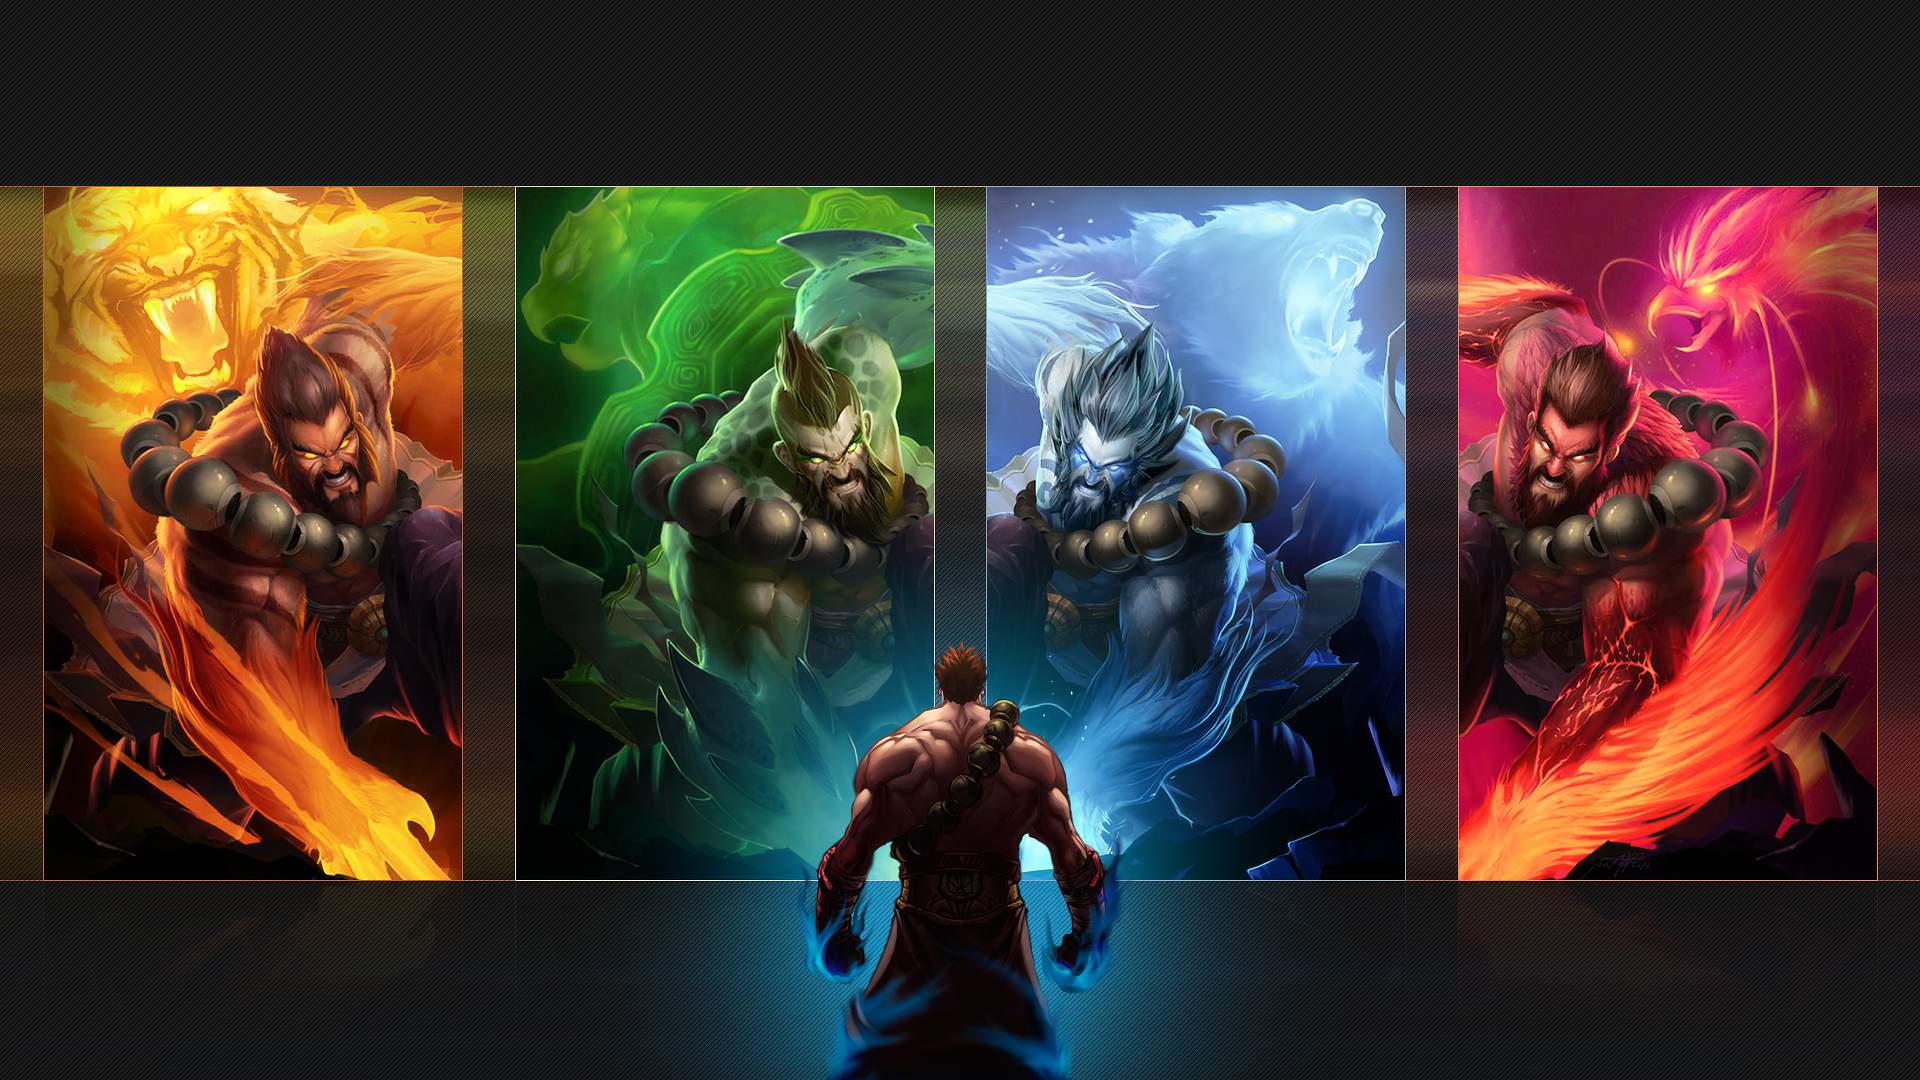 video game, league of legends, udyr (league of legends) lock screen backgrounds